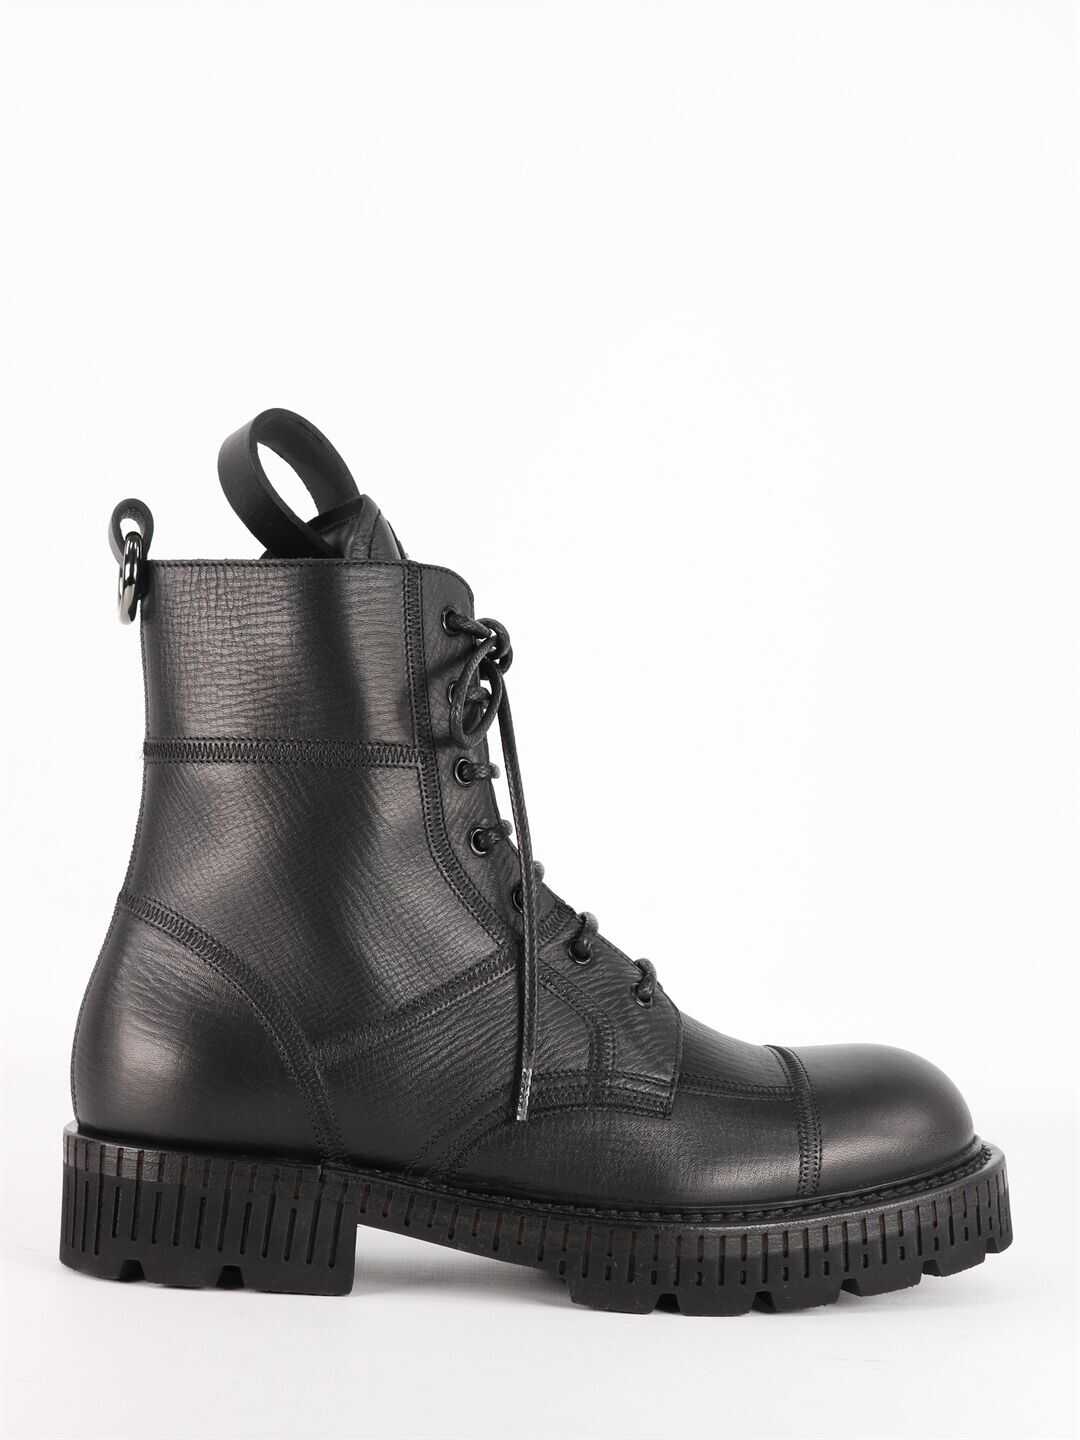 Dolce & Gabbana Laced Up Boot Black b-mall.ro